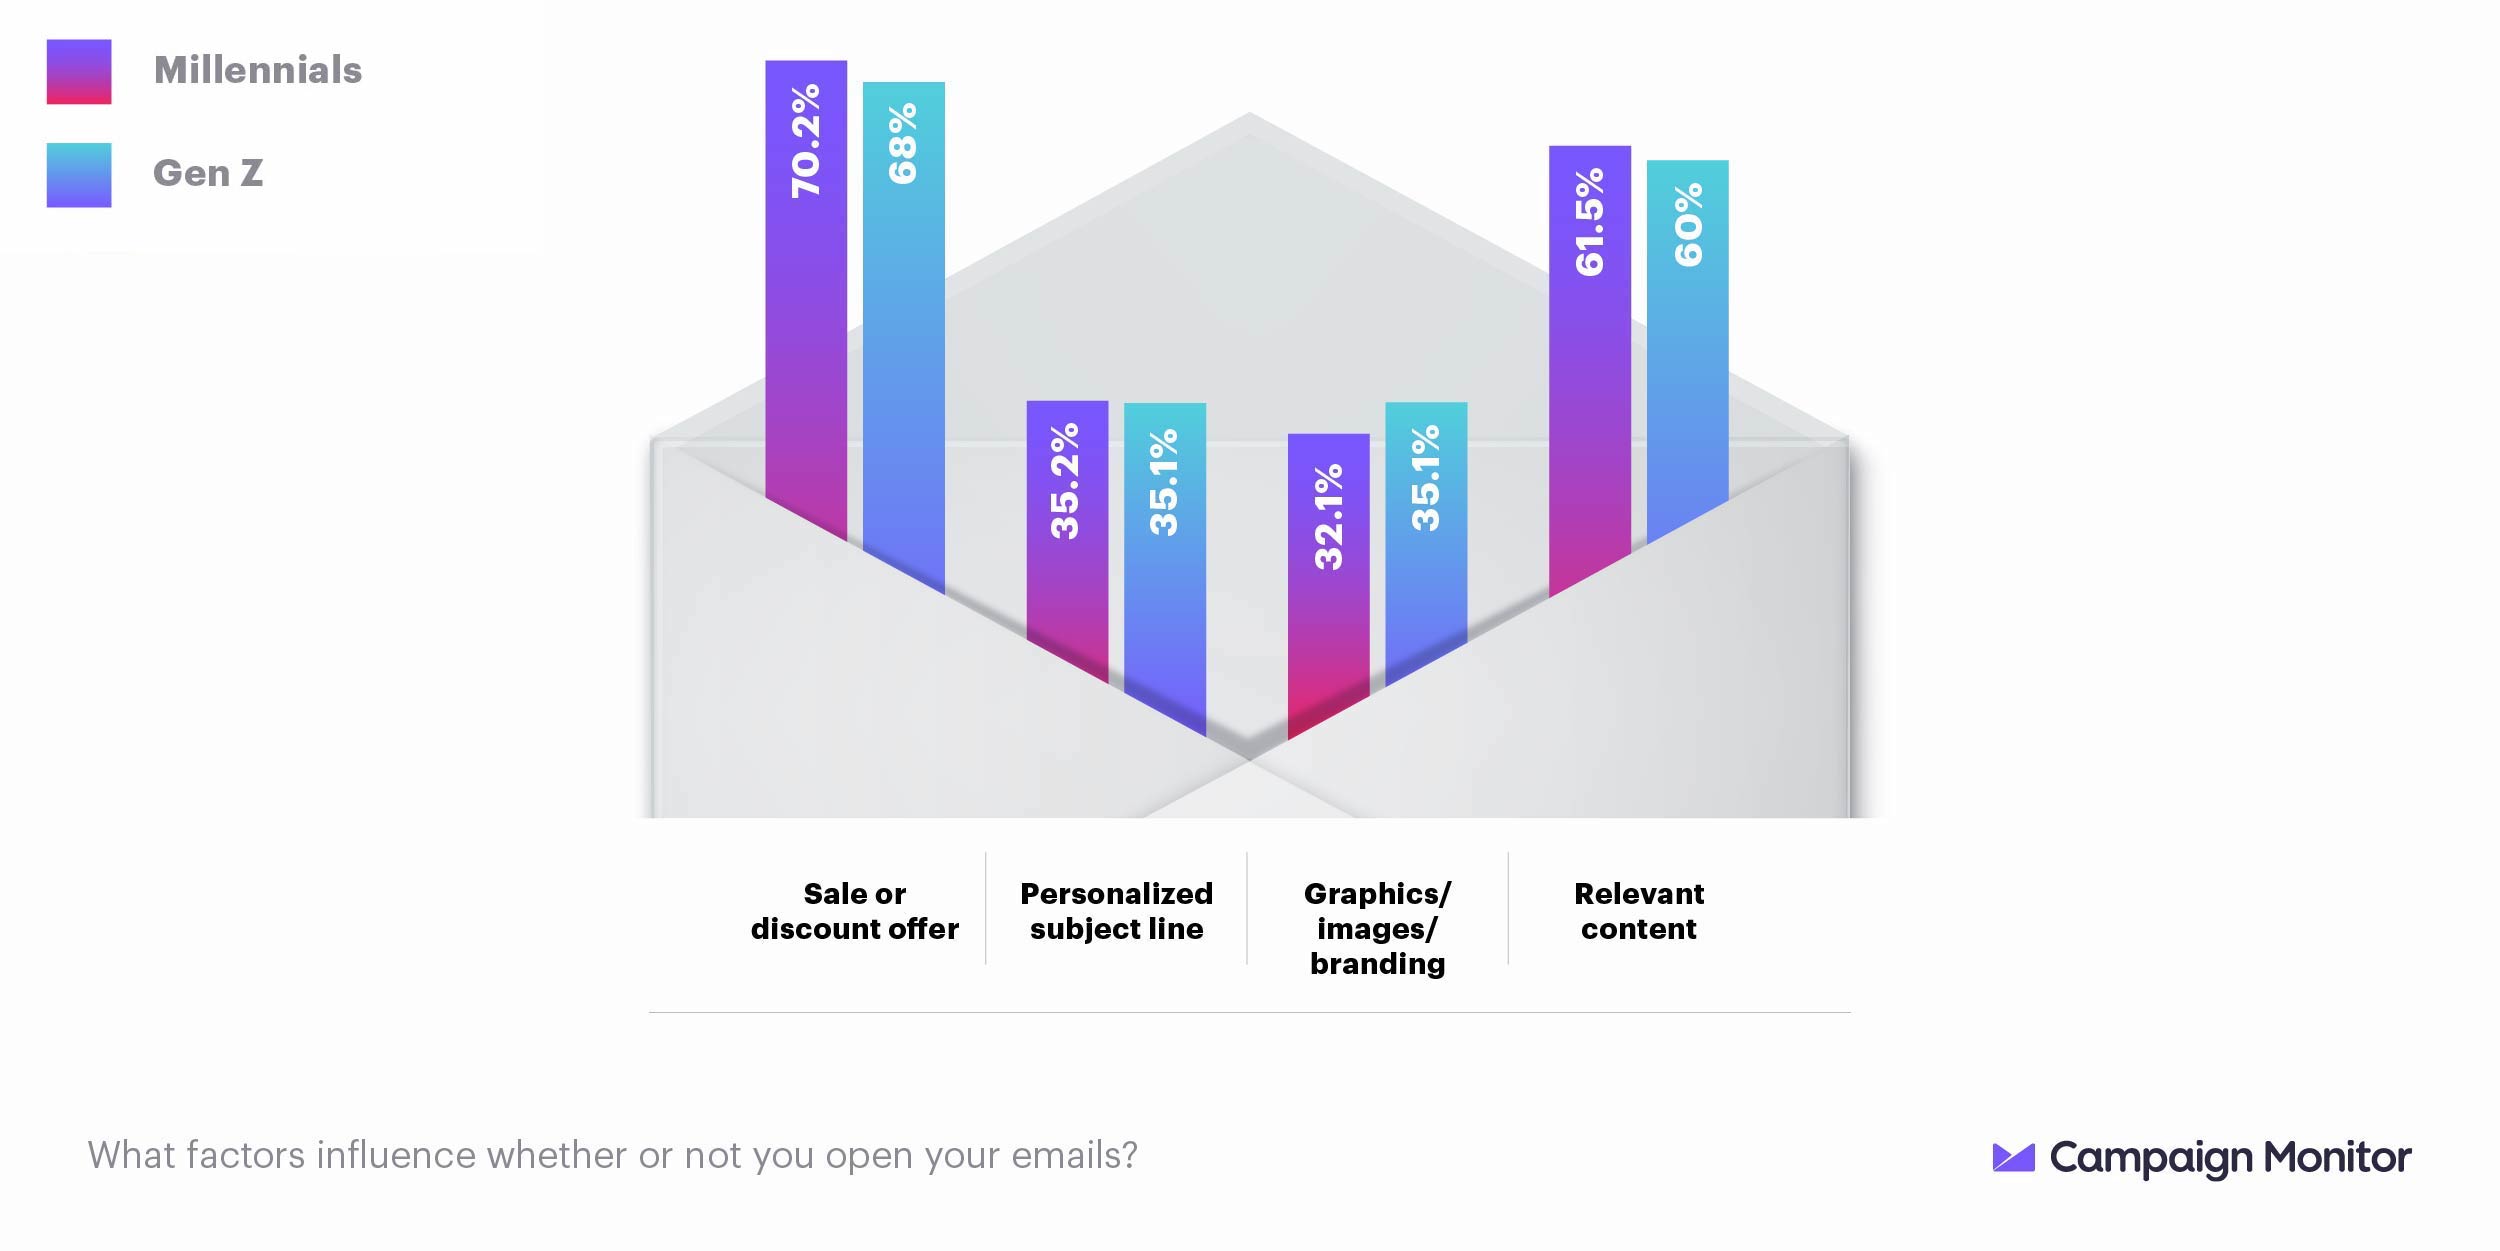 asking millennials and Gen z what factors influence email opens, discounts and relevant content are most enticing